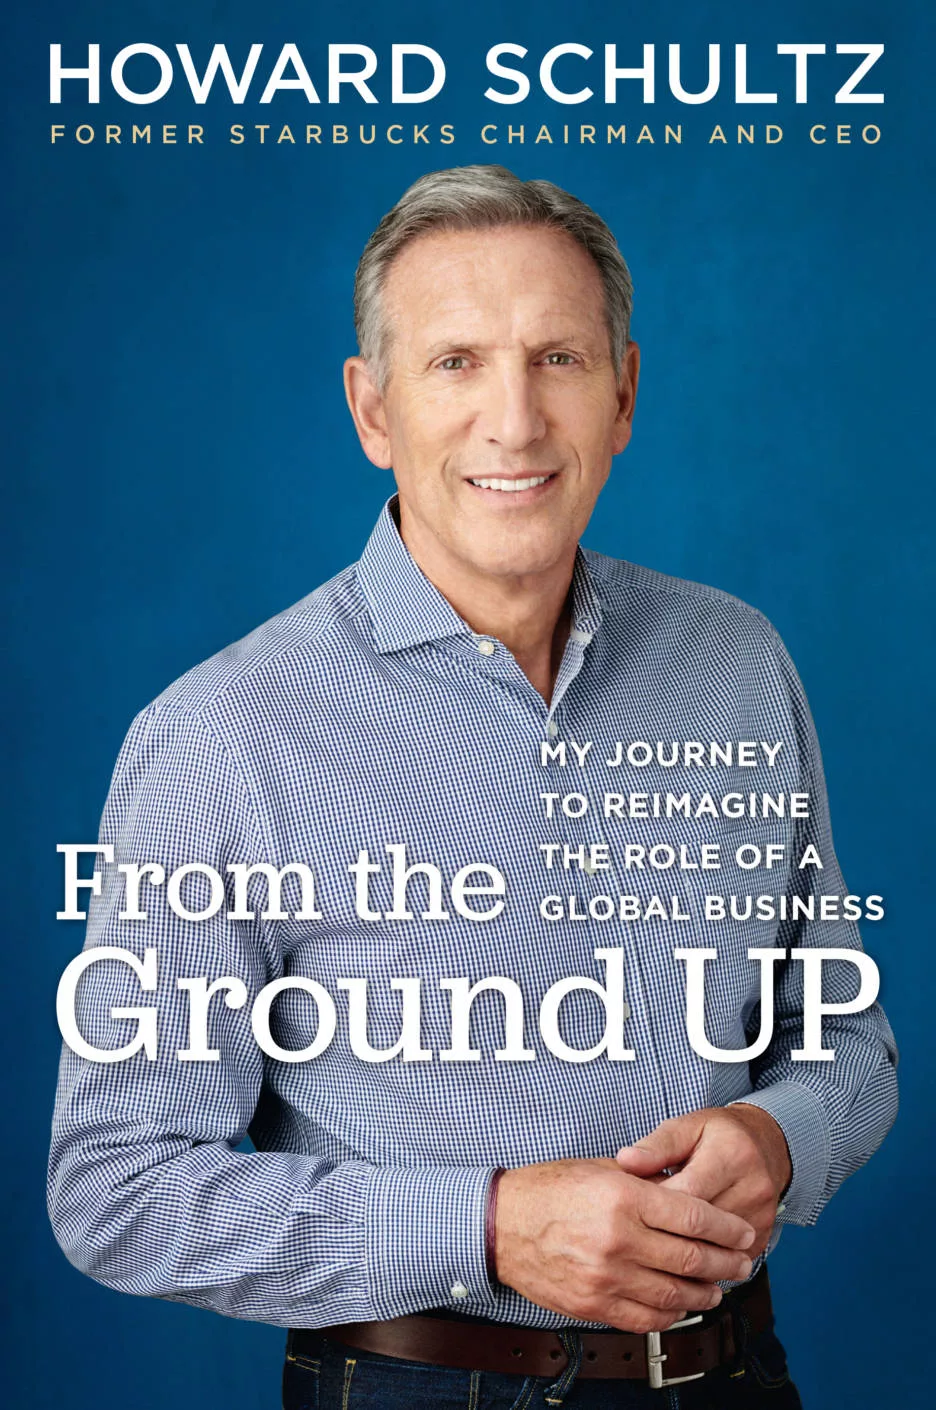 From the Ground Up: My Journey to Reimagine the Role of a Global Business